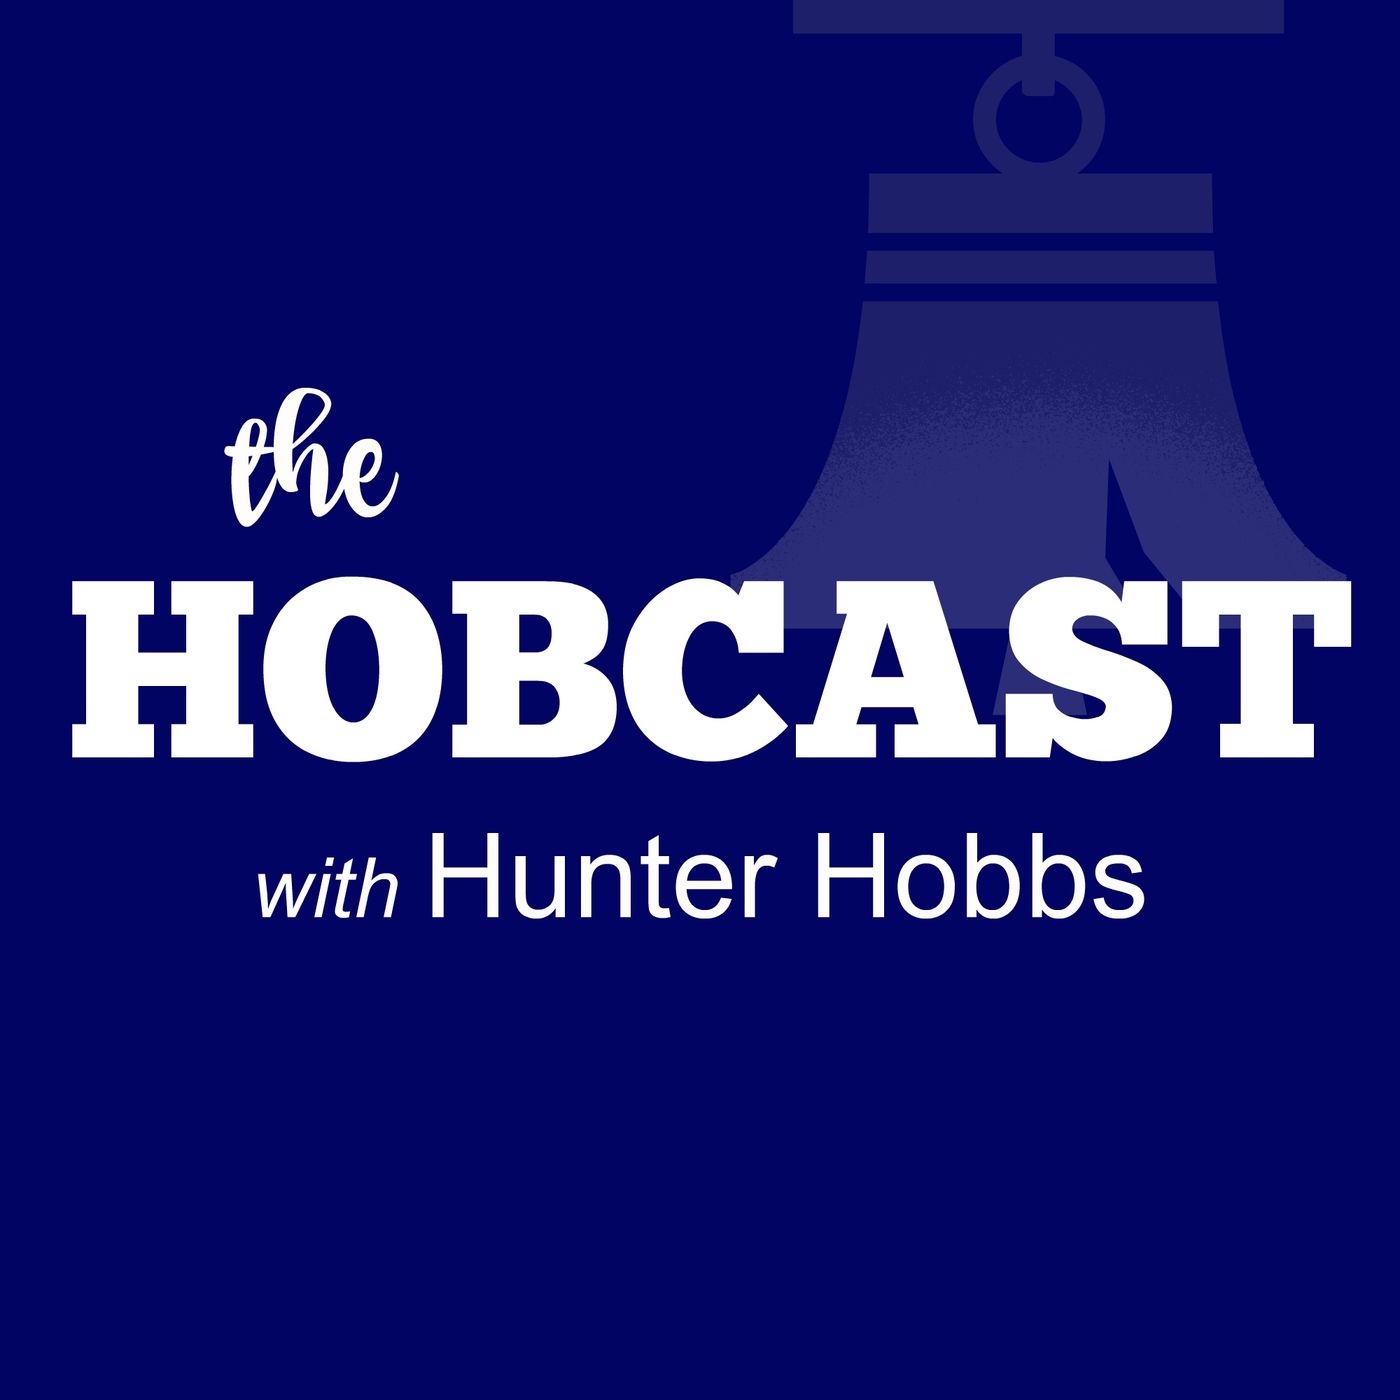 Hobcast Episode 1 - Electoral College and Beyond